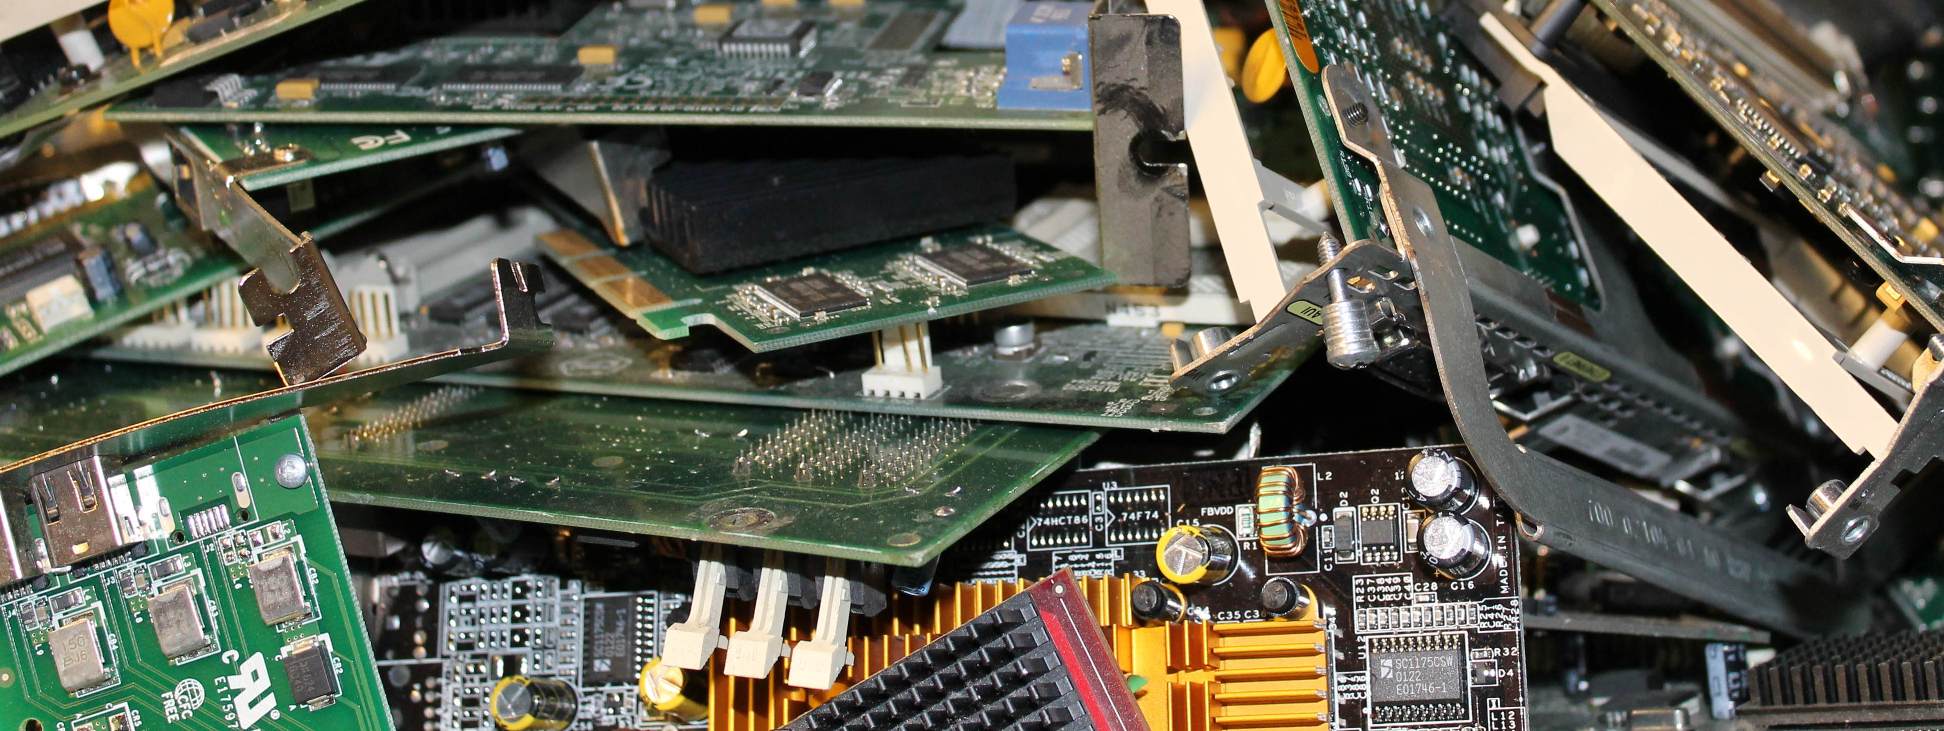 E-Waste fuels the counterfeit epidemic